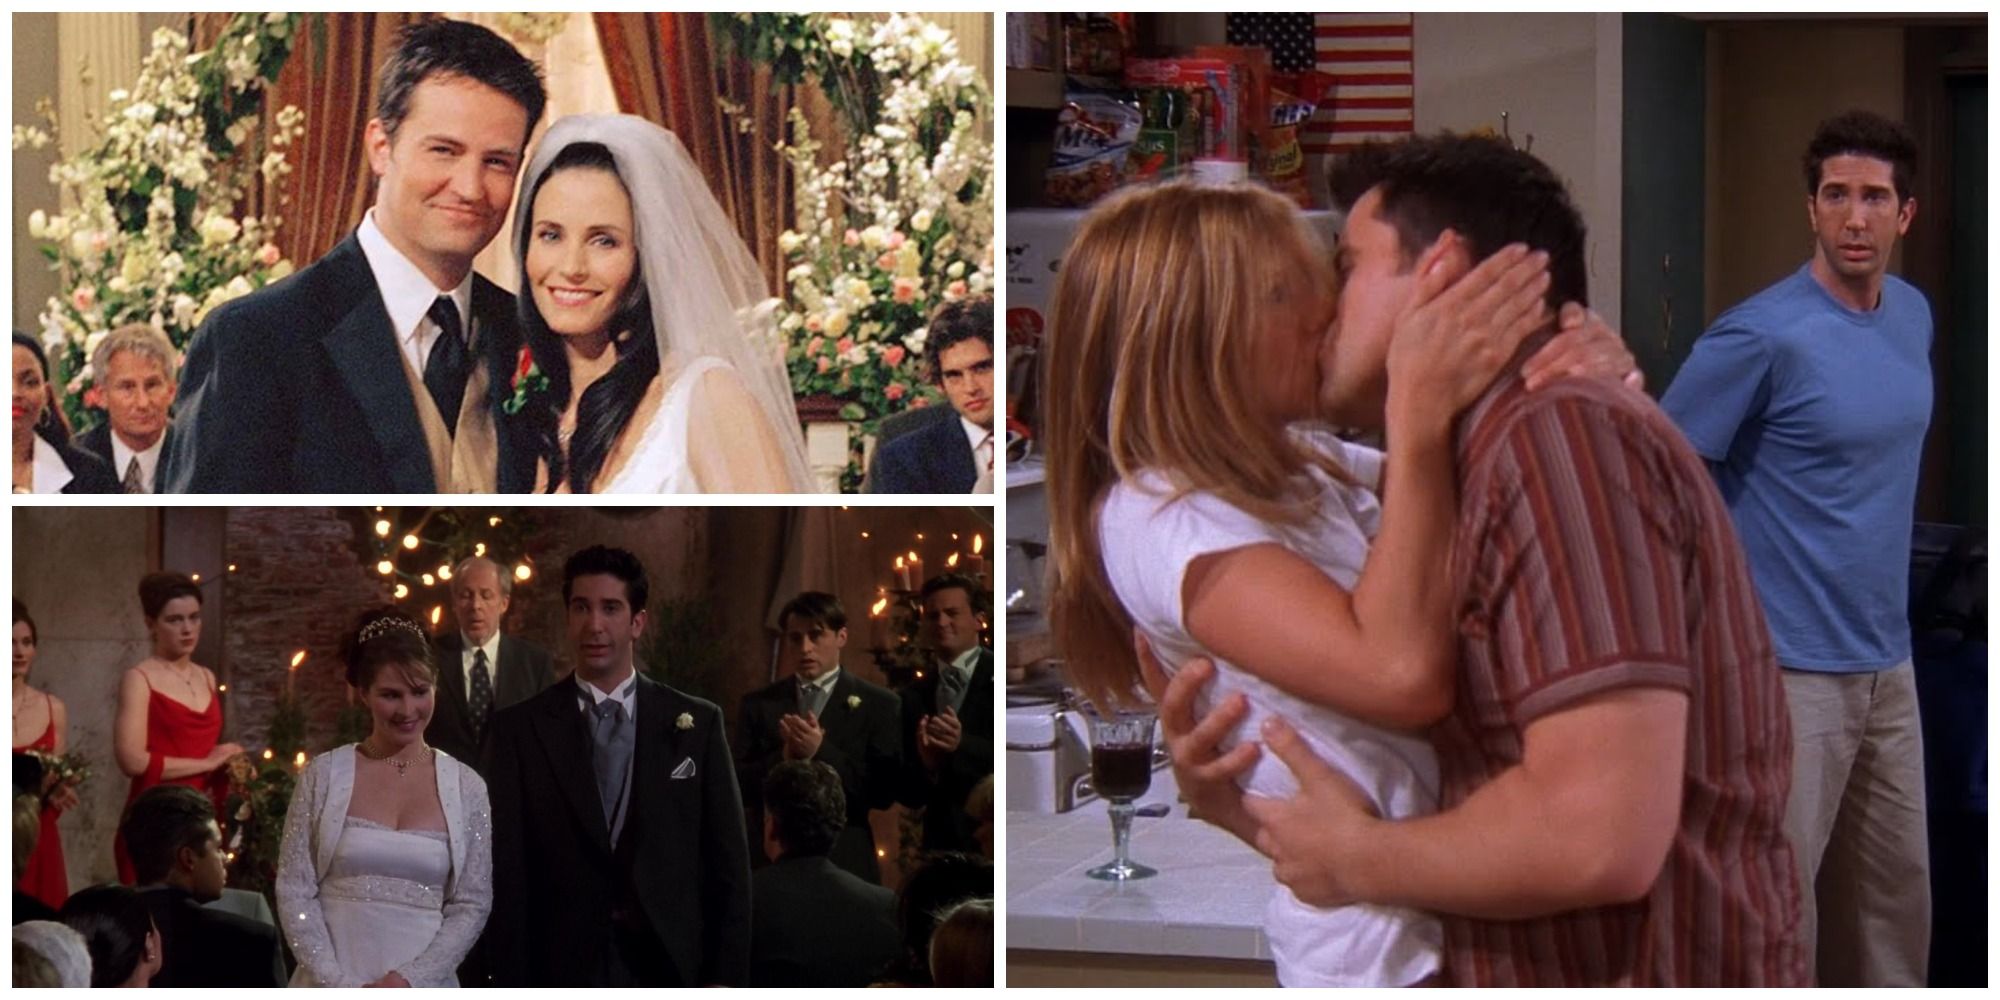 Friends 10 Major Relationships Ranked Most To Least Successful